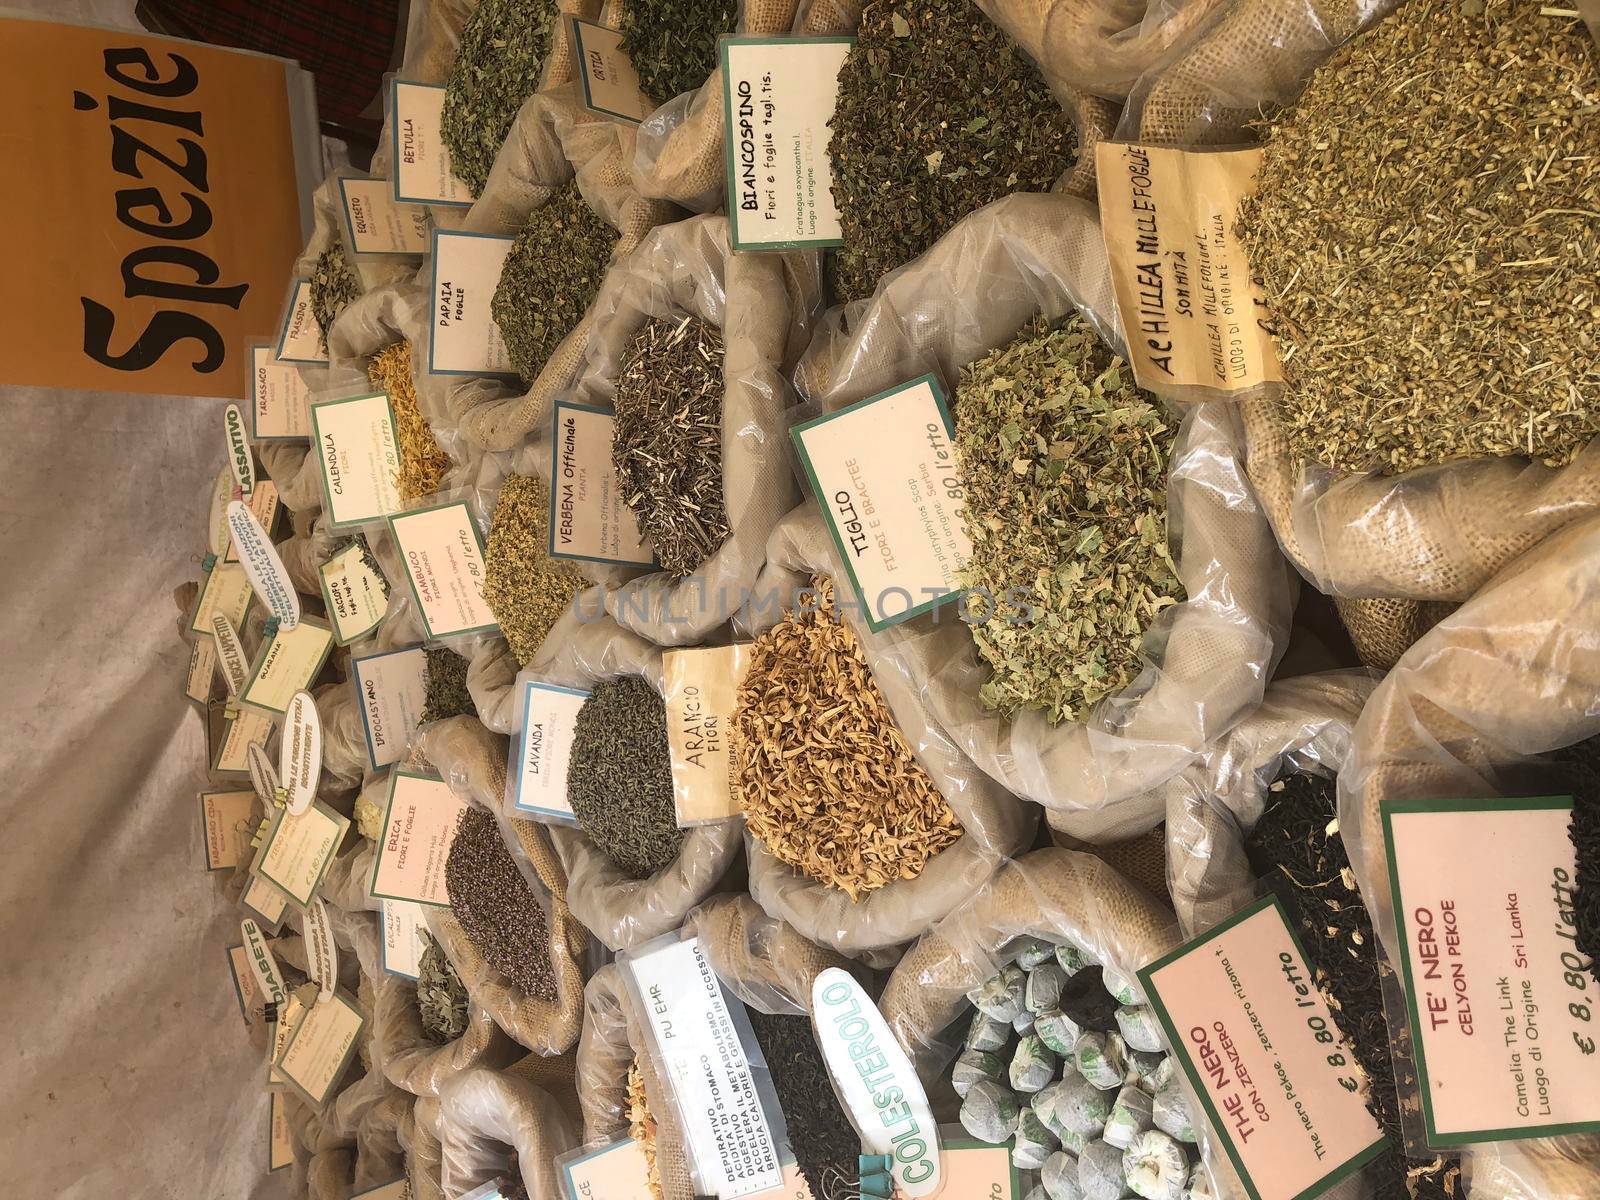 Assorted spices at italian market in the center of Florence, Italy by Mariakray